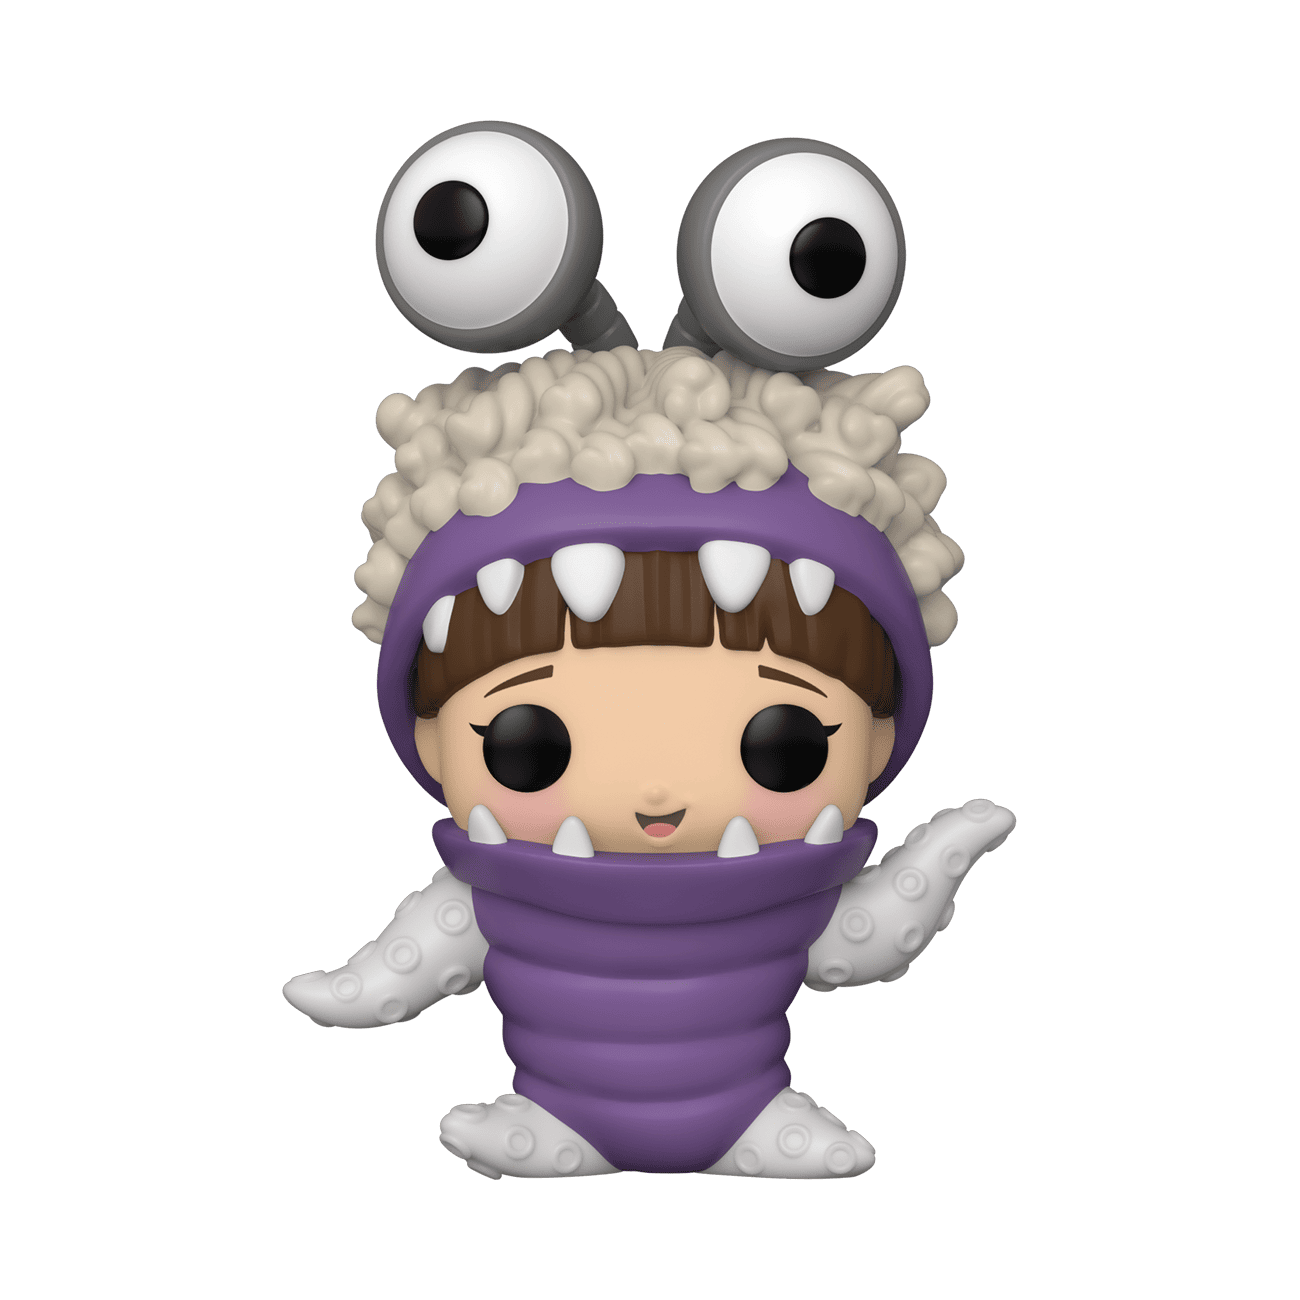 Buy Boo with Hood Up at Funko.